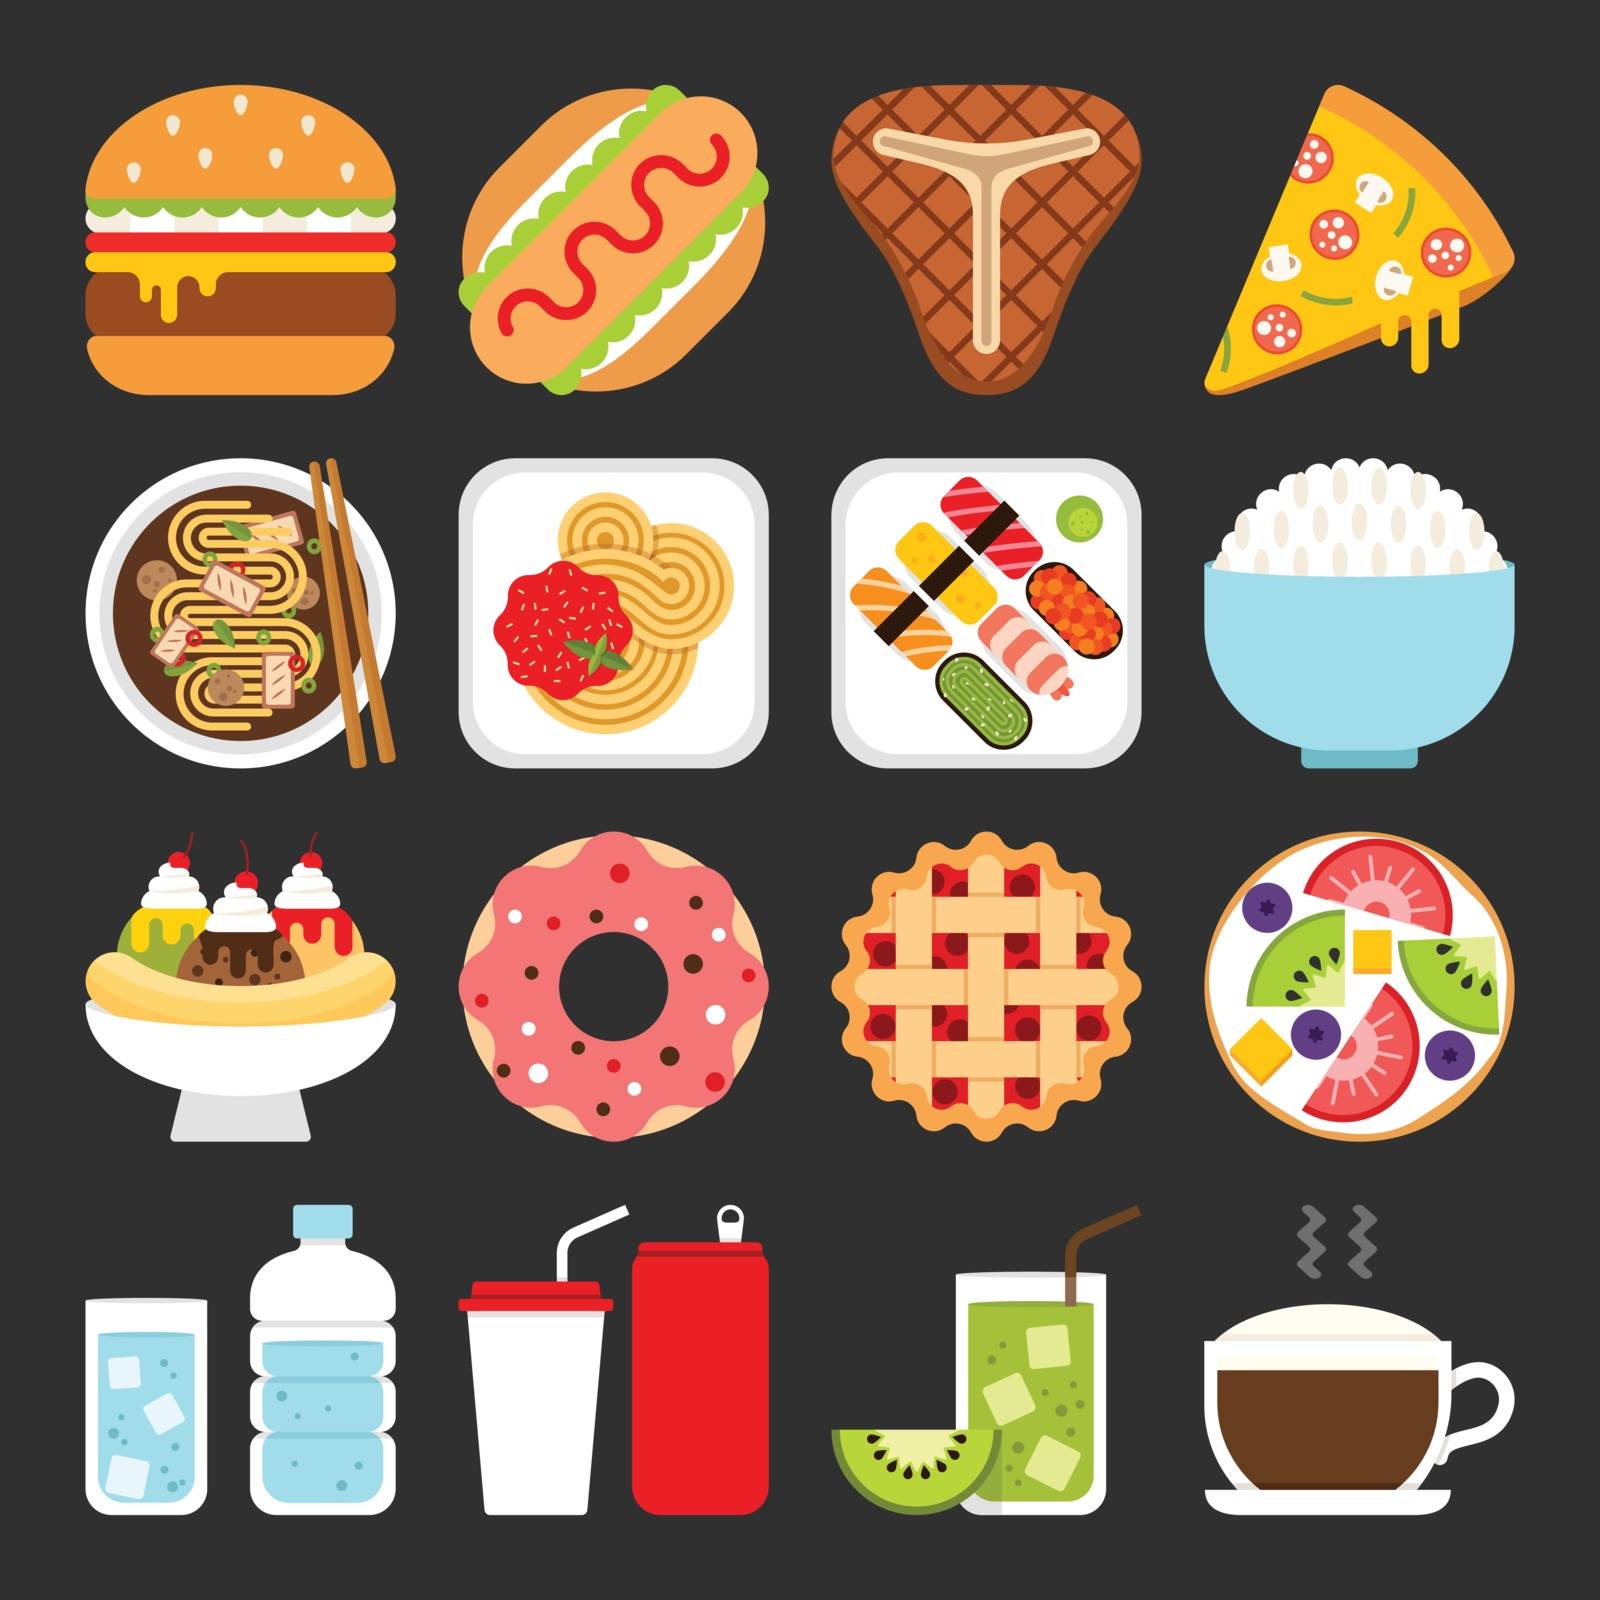 Food icons, lunch